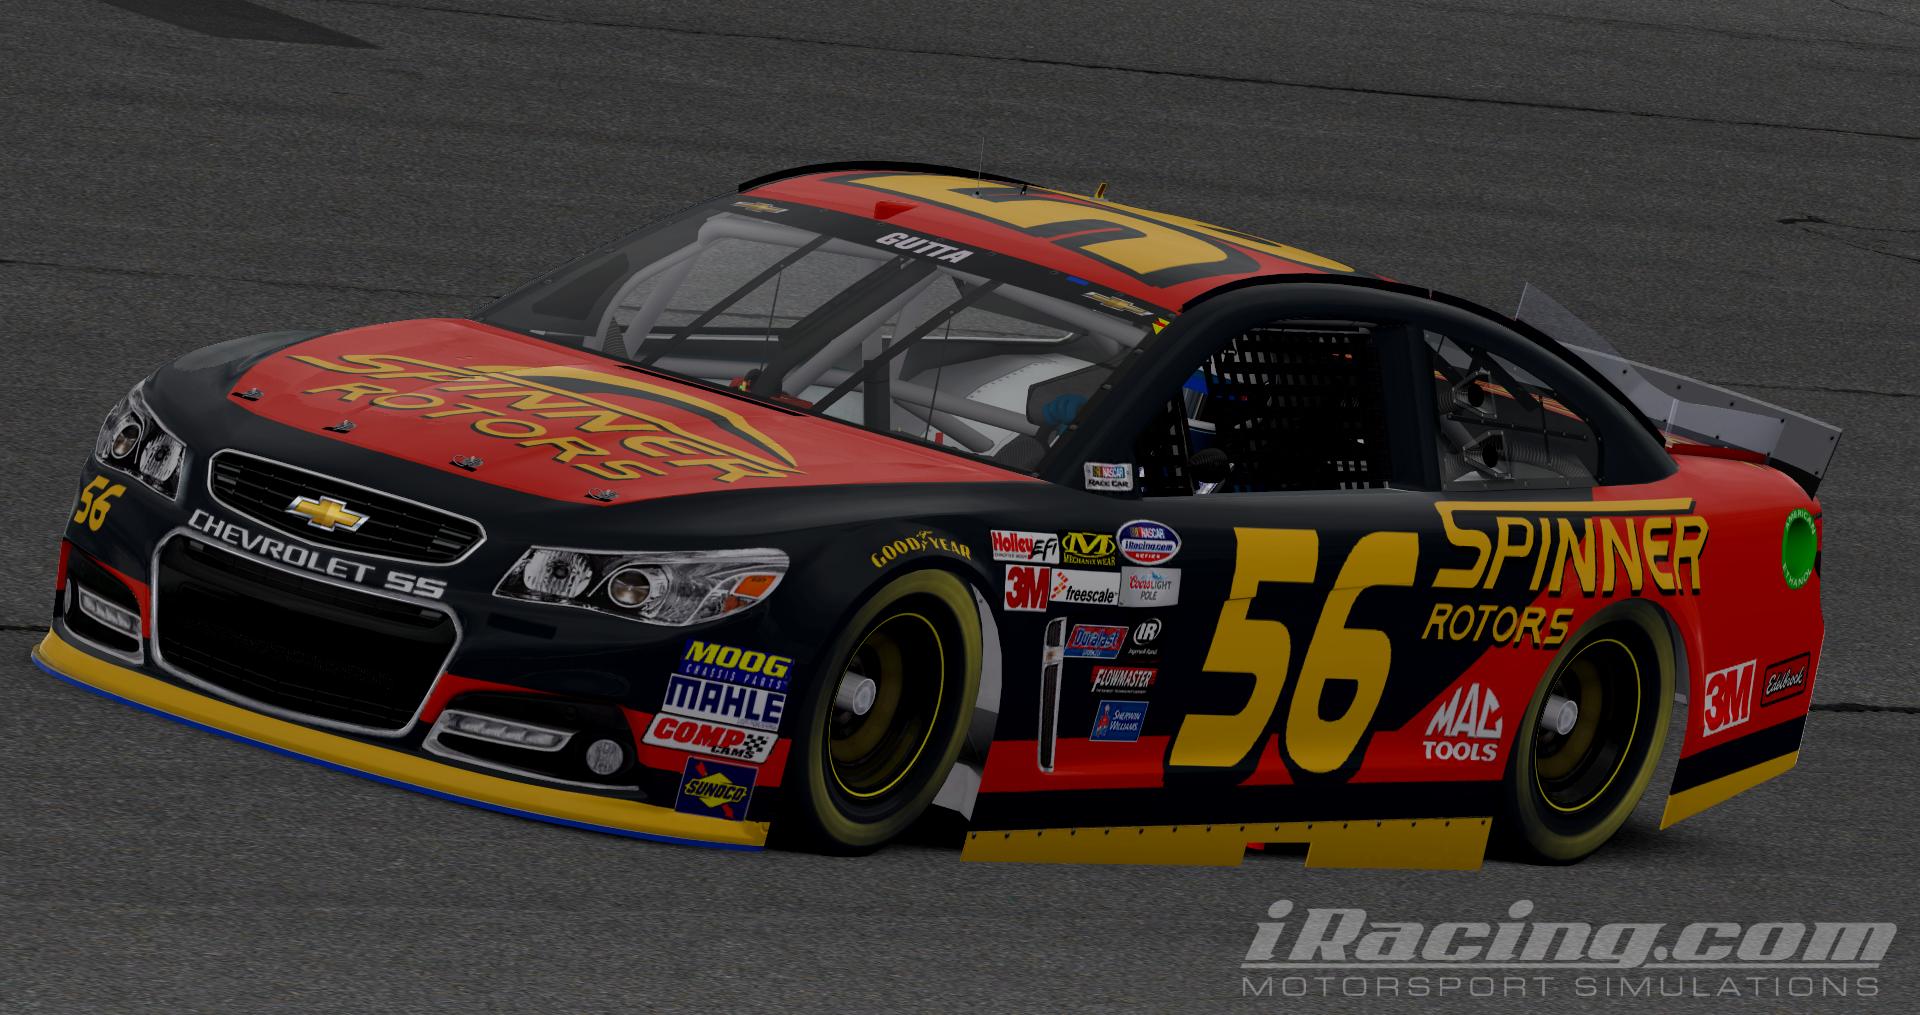 NASCAR Racing 2 - Spinner Rotors Remake by James Gutta - Trading Paints